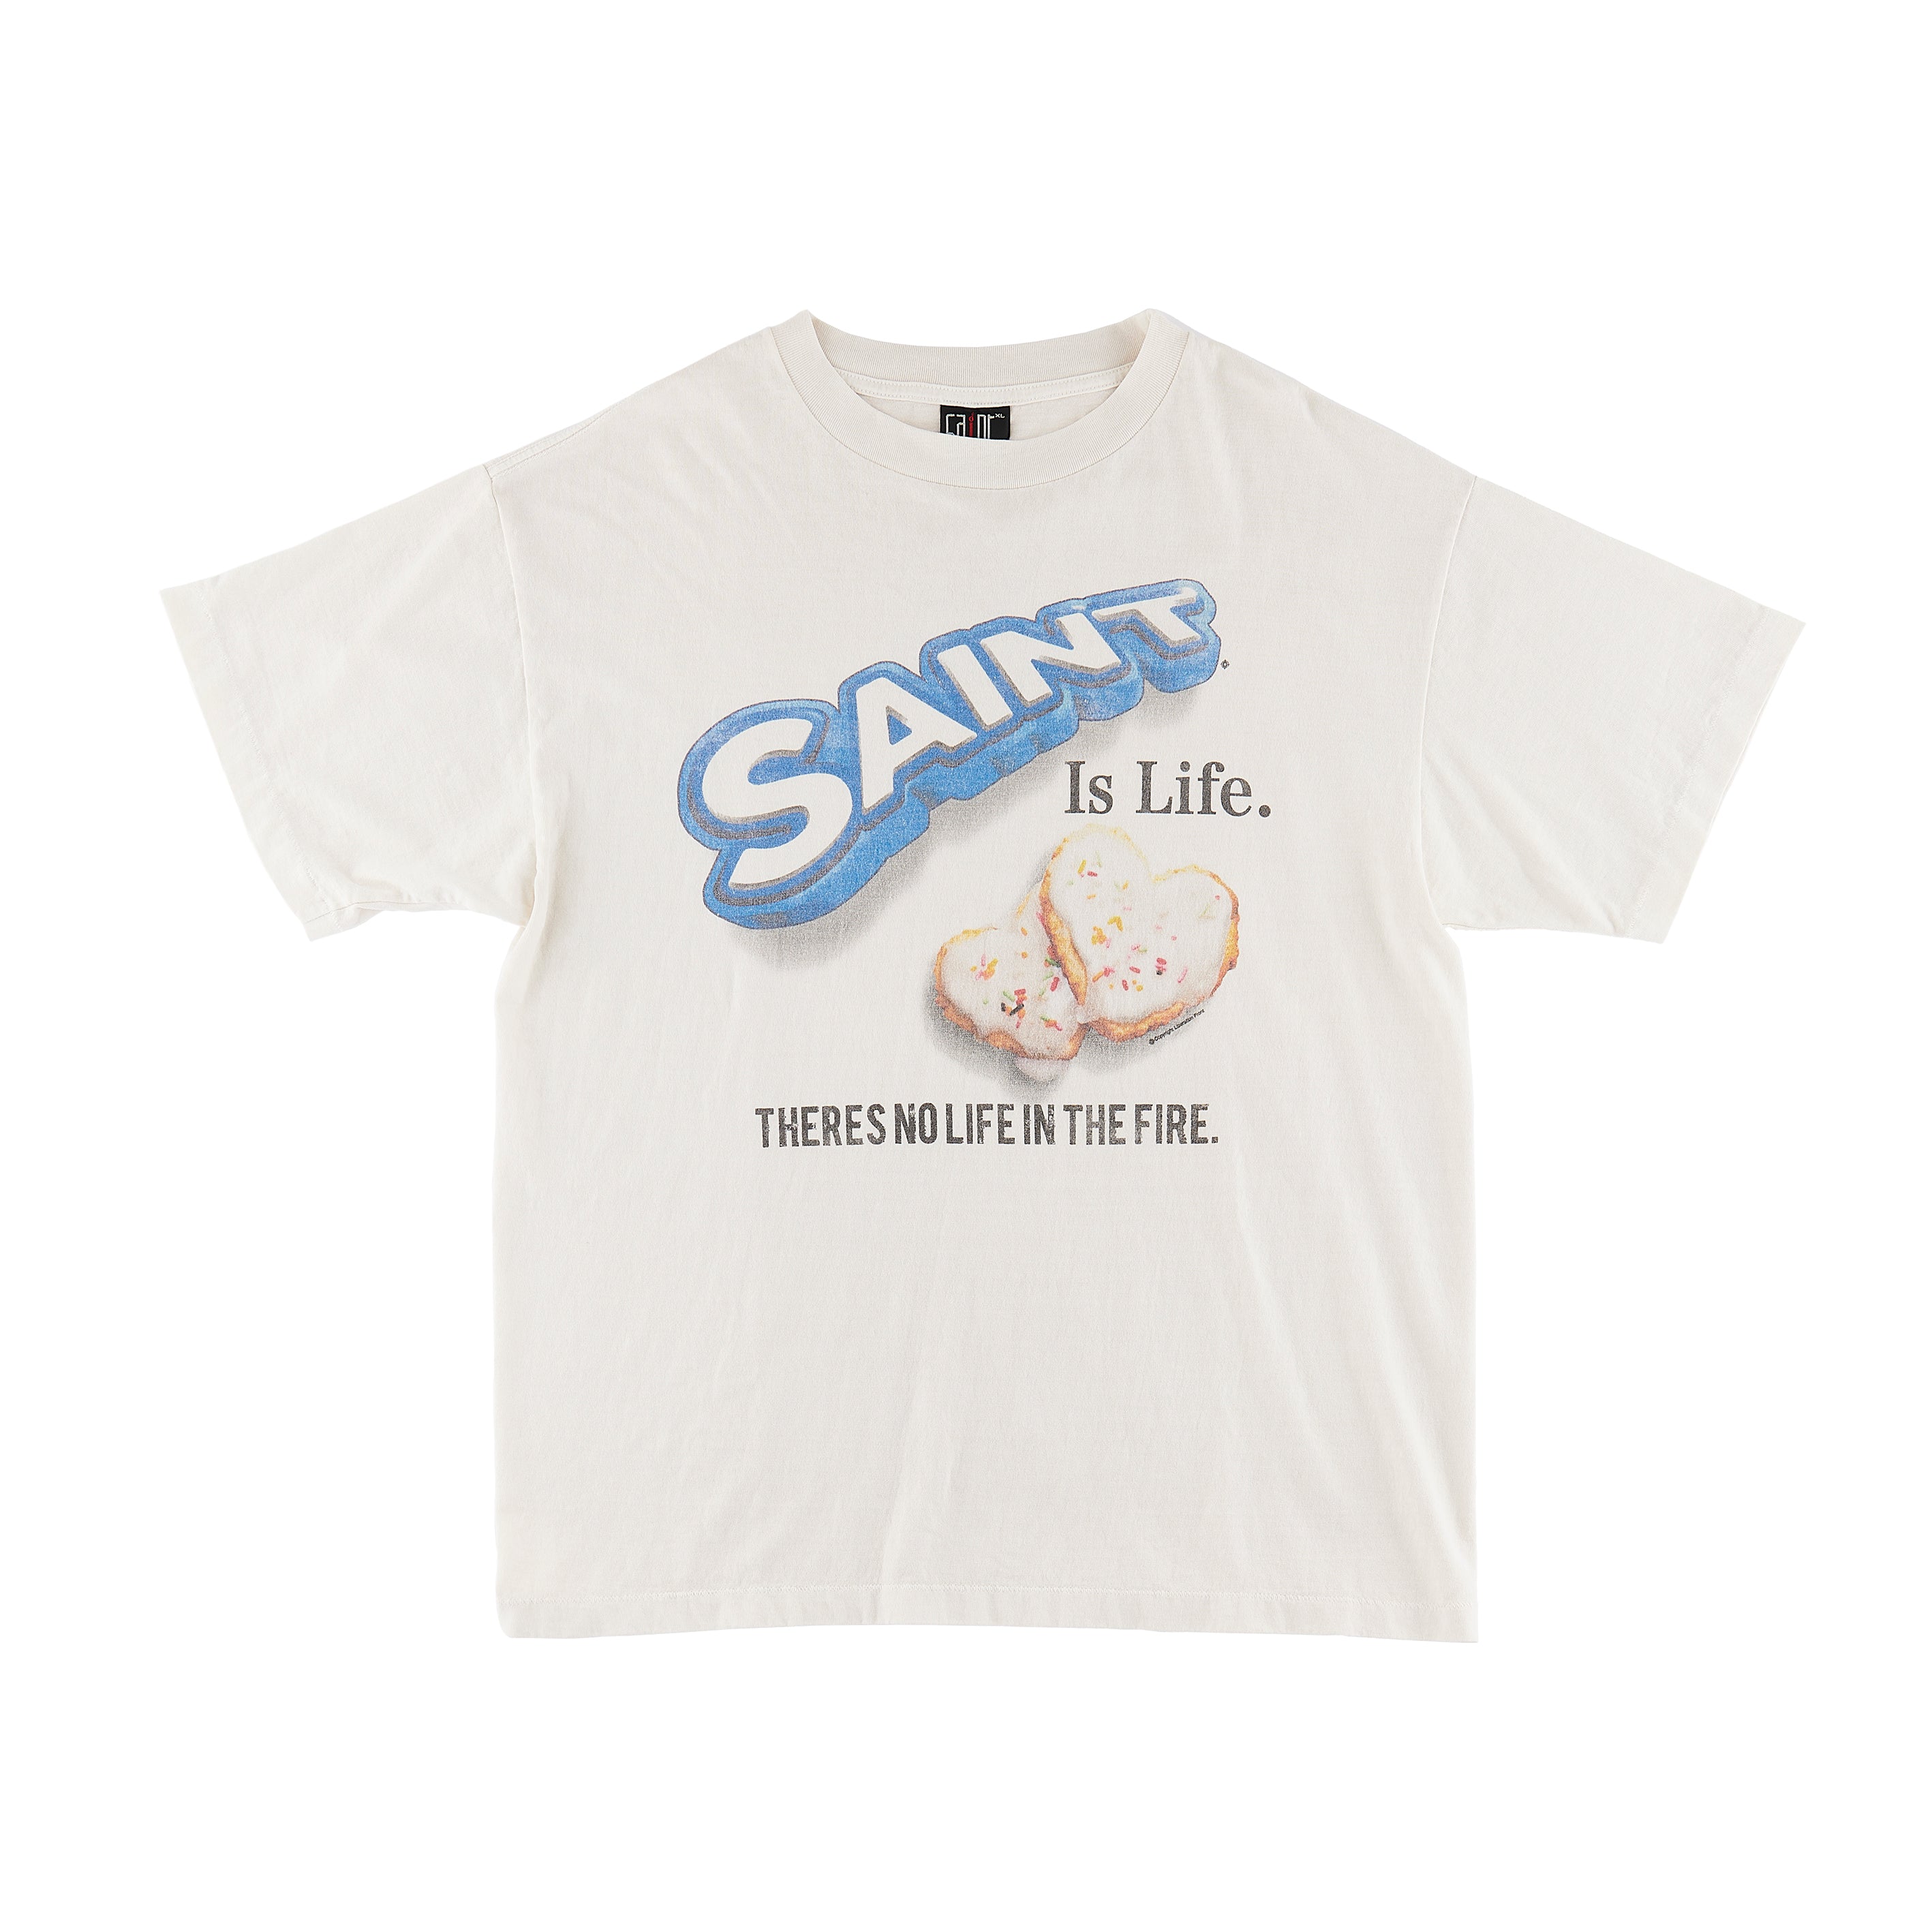 ANEX× Fruit of the Loom CLASSIC LOGO S / S TEE